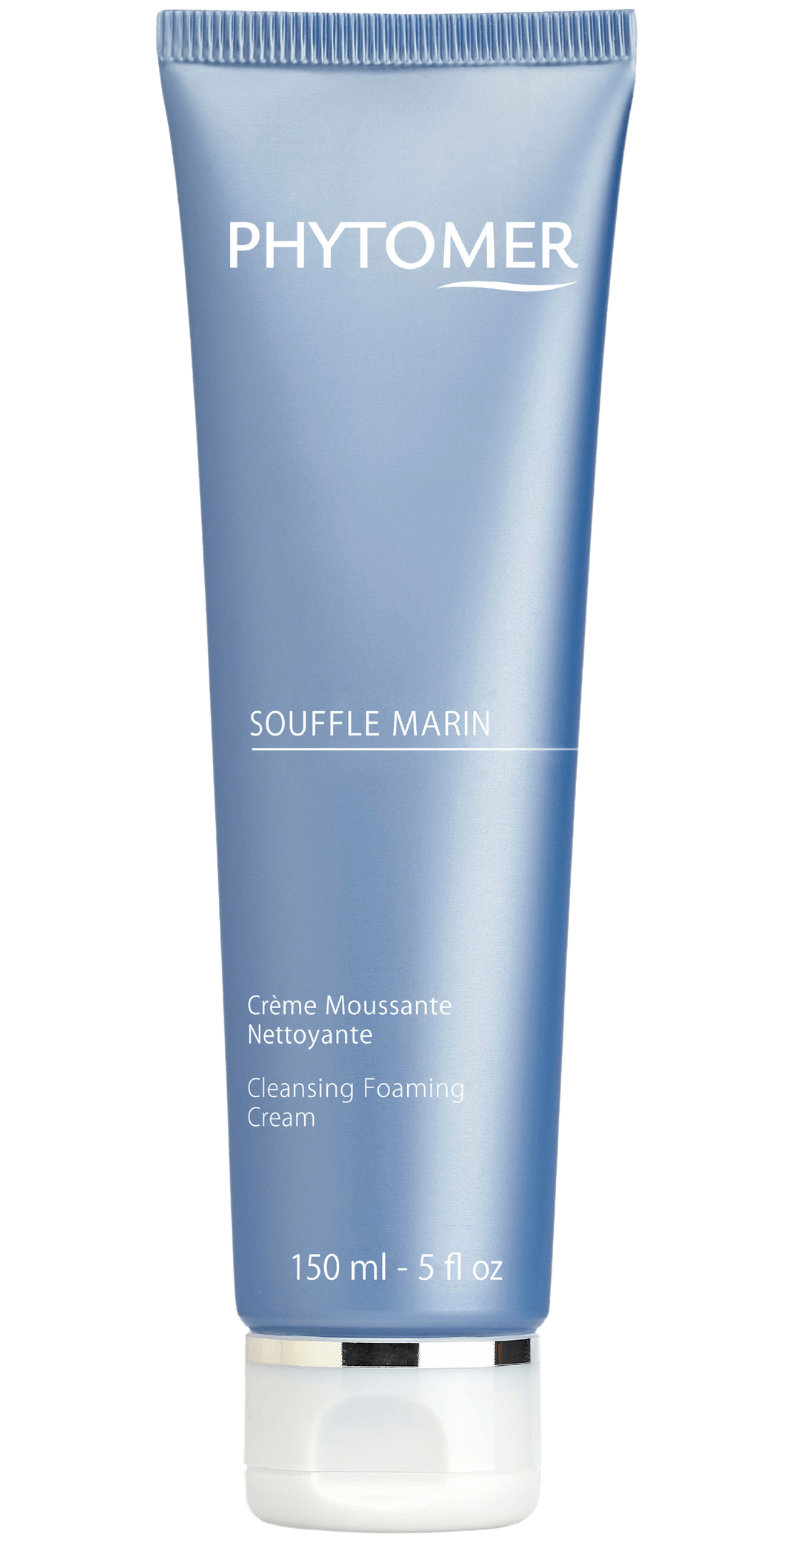 's Phytomer SOUFFLE MARIN Cleansing Foaming Cream - Bellini's Skin and Parfumerie 